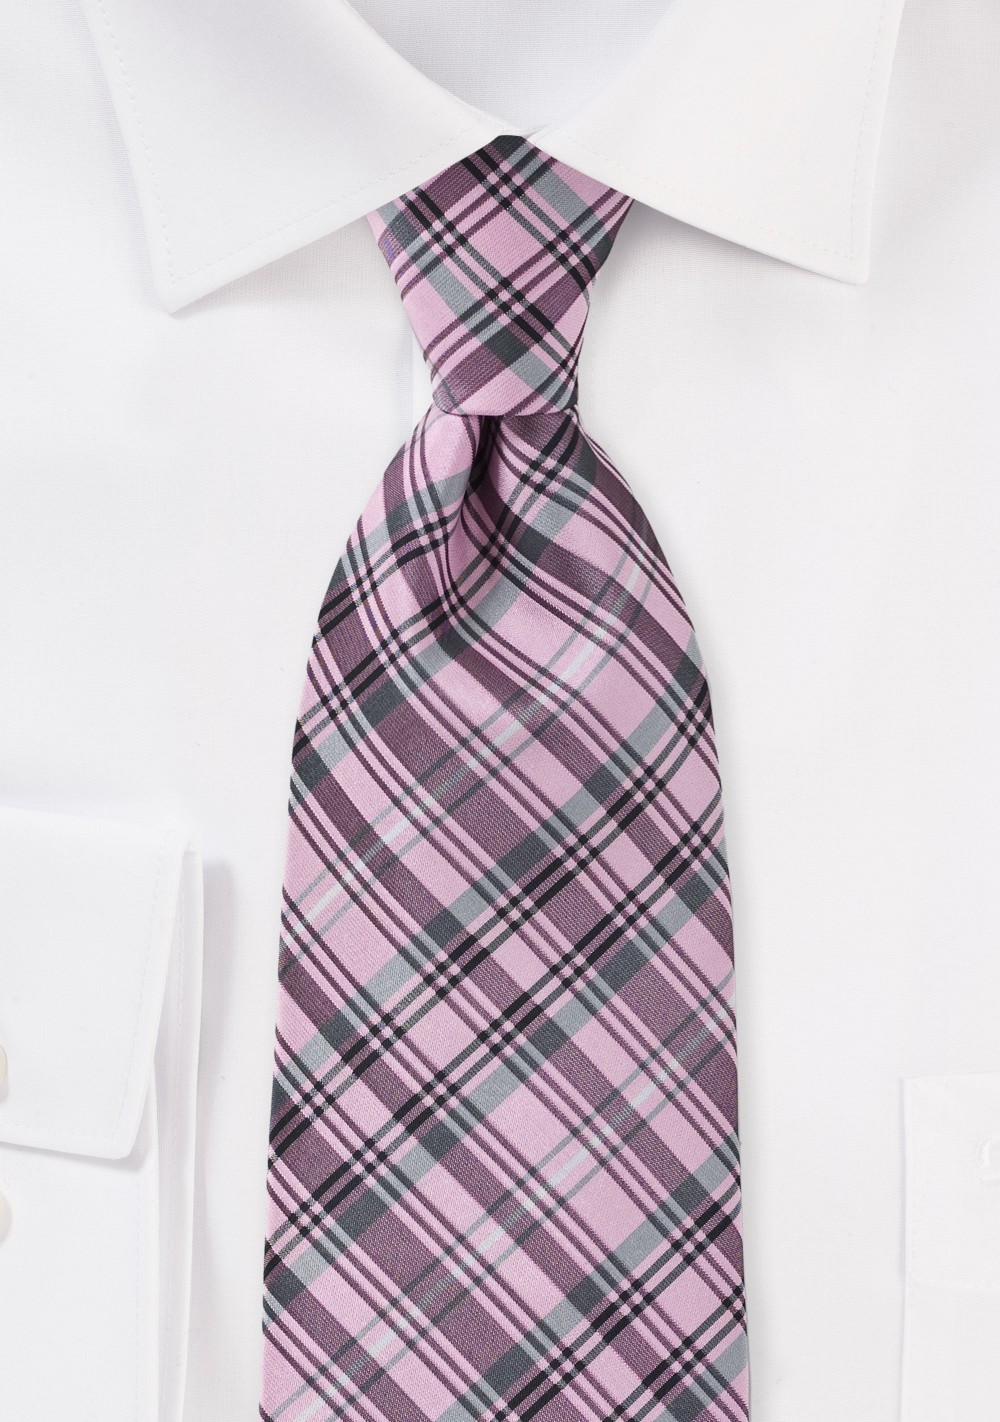 Modern Plaid Tie in Pink and Grey